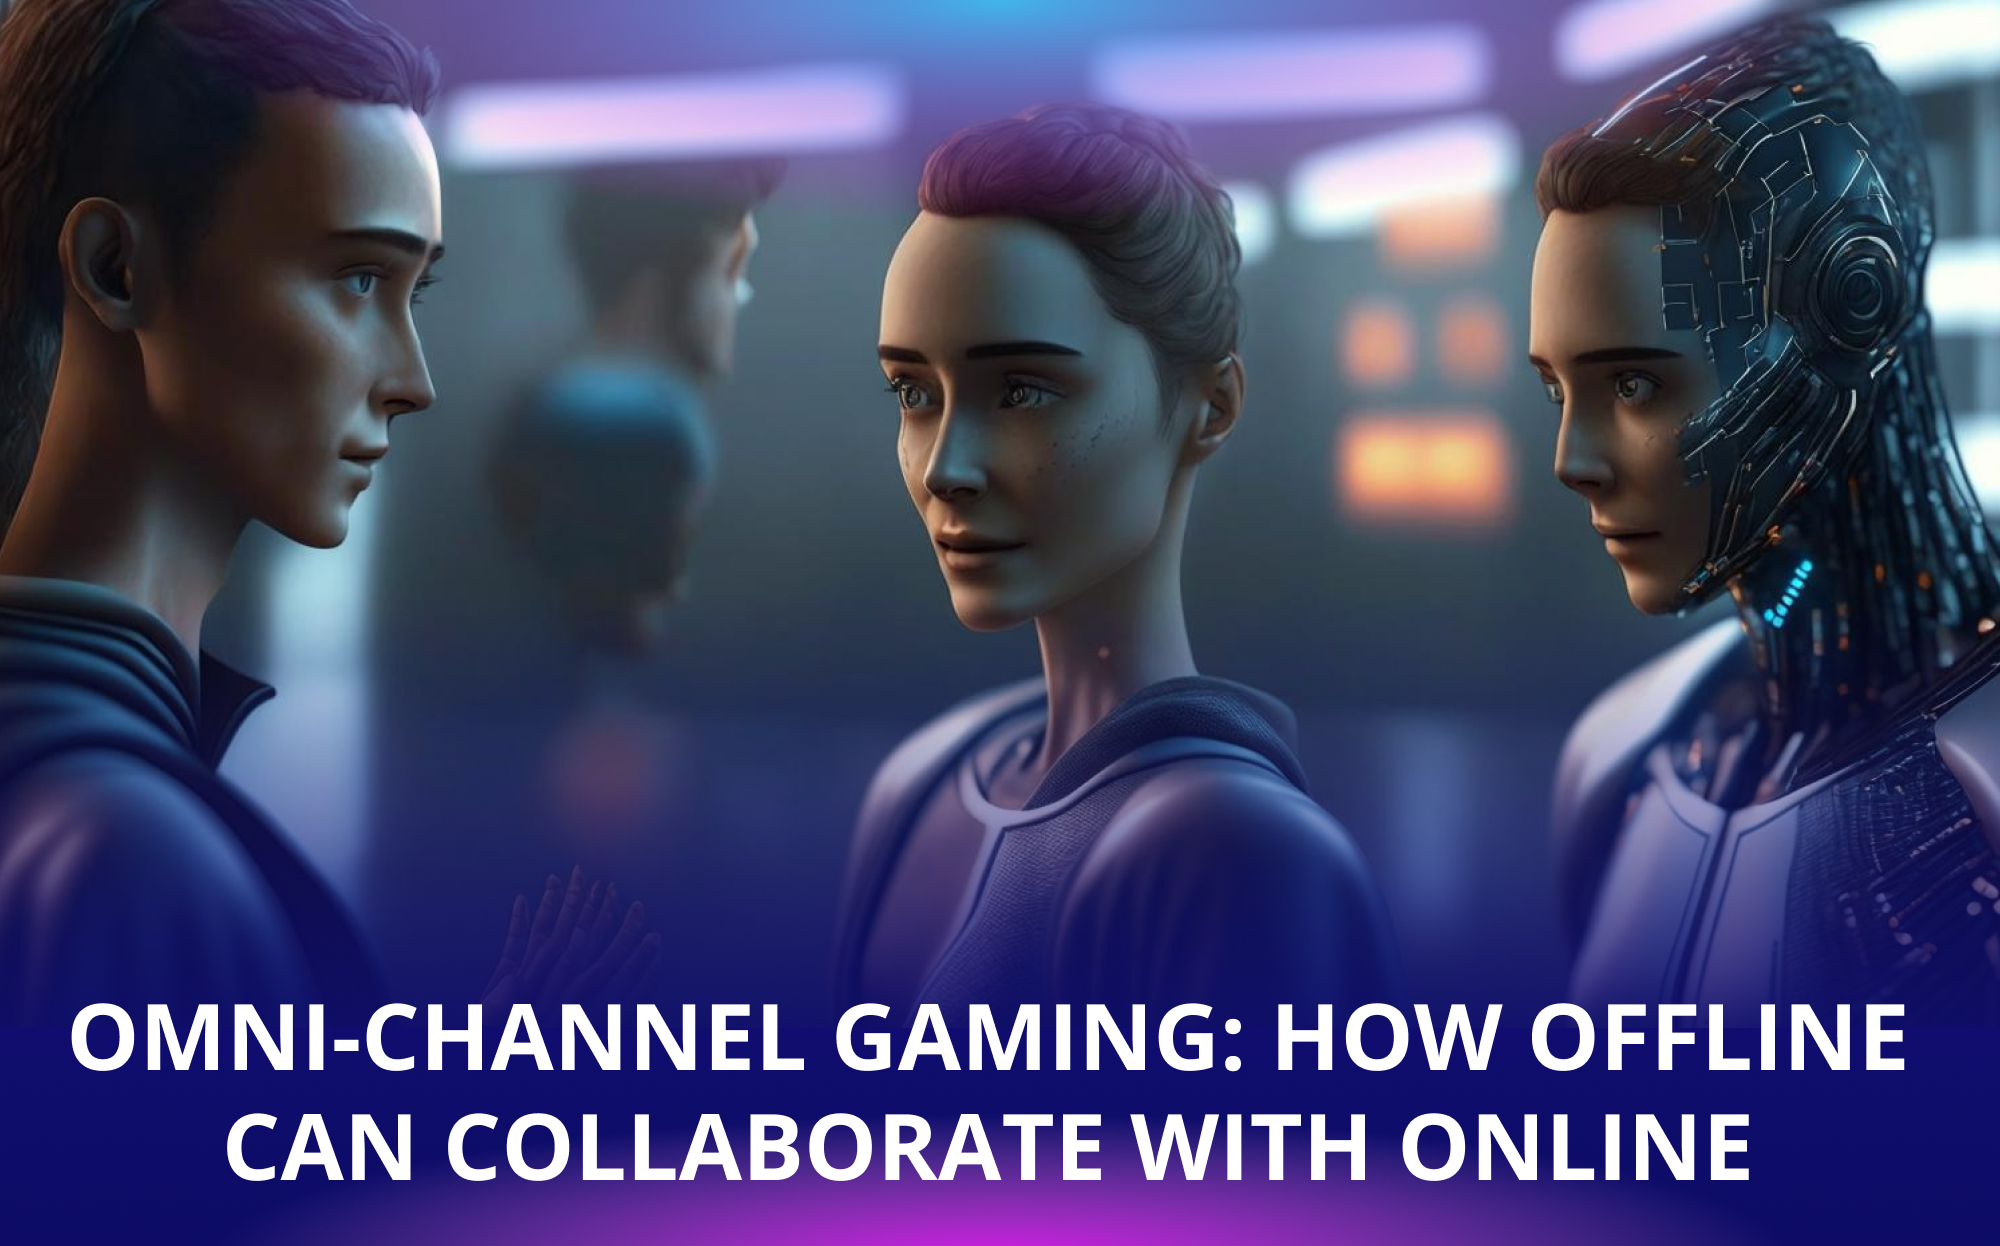 Omni-channel solutions for land-based casino and iGaming